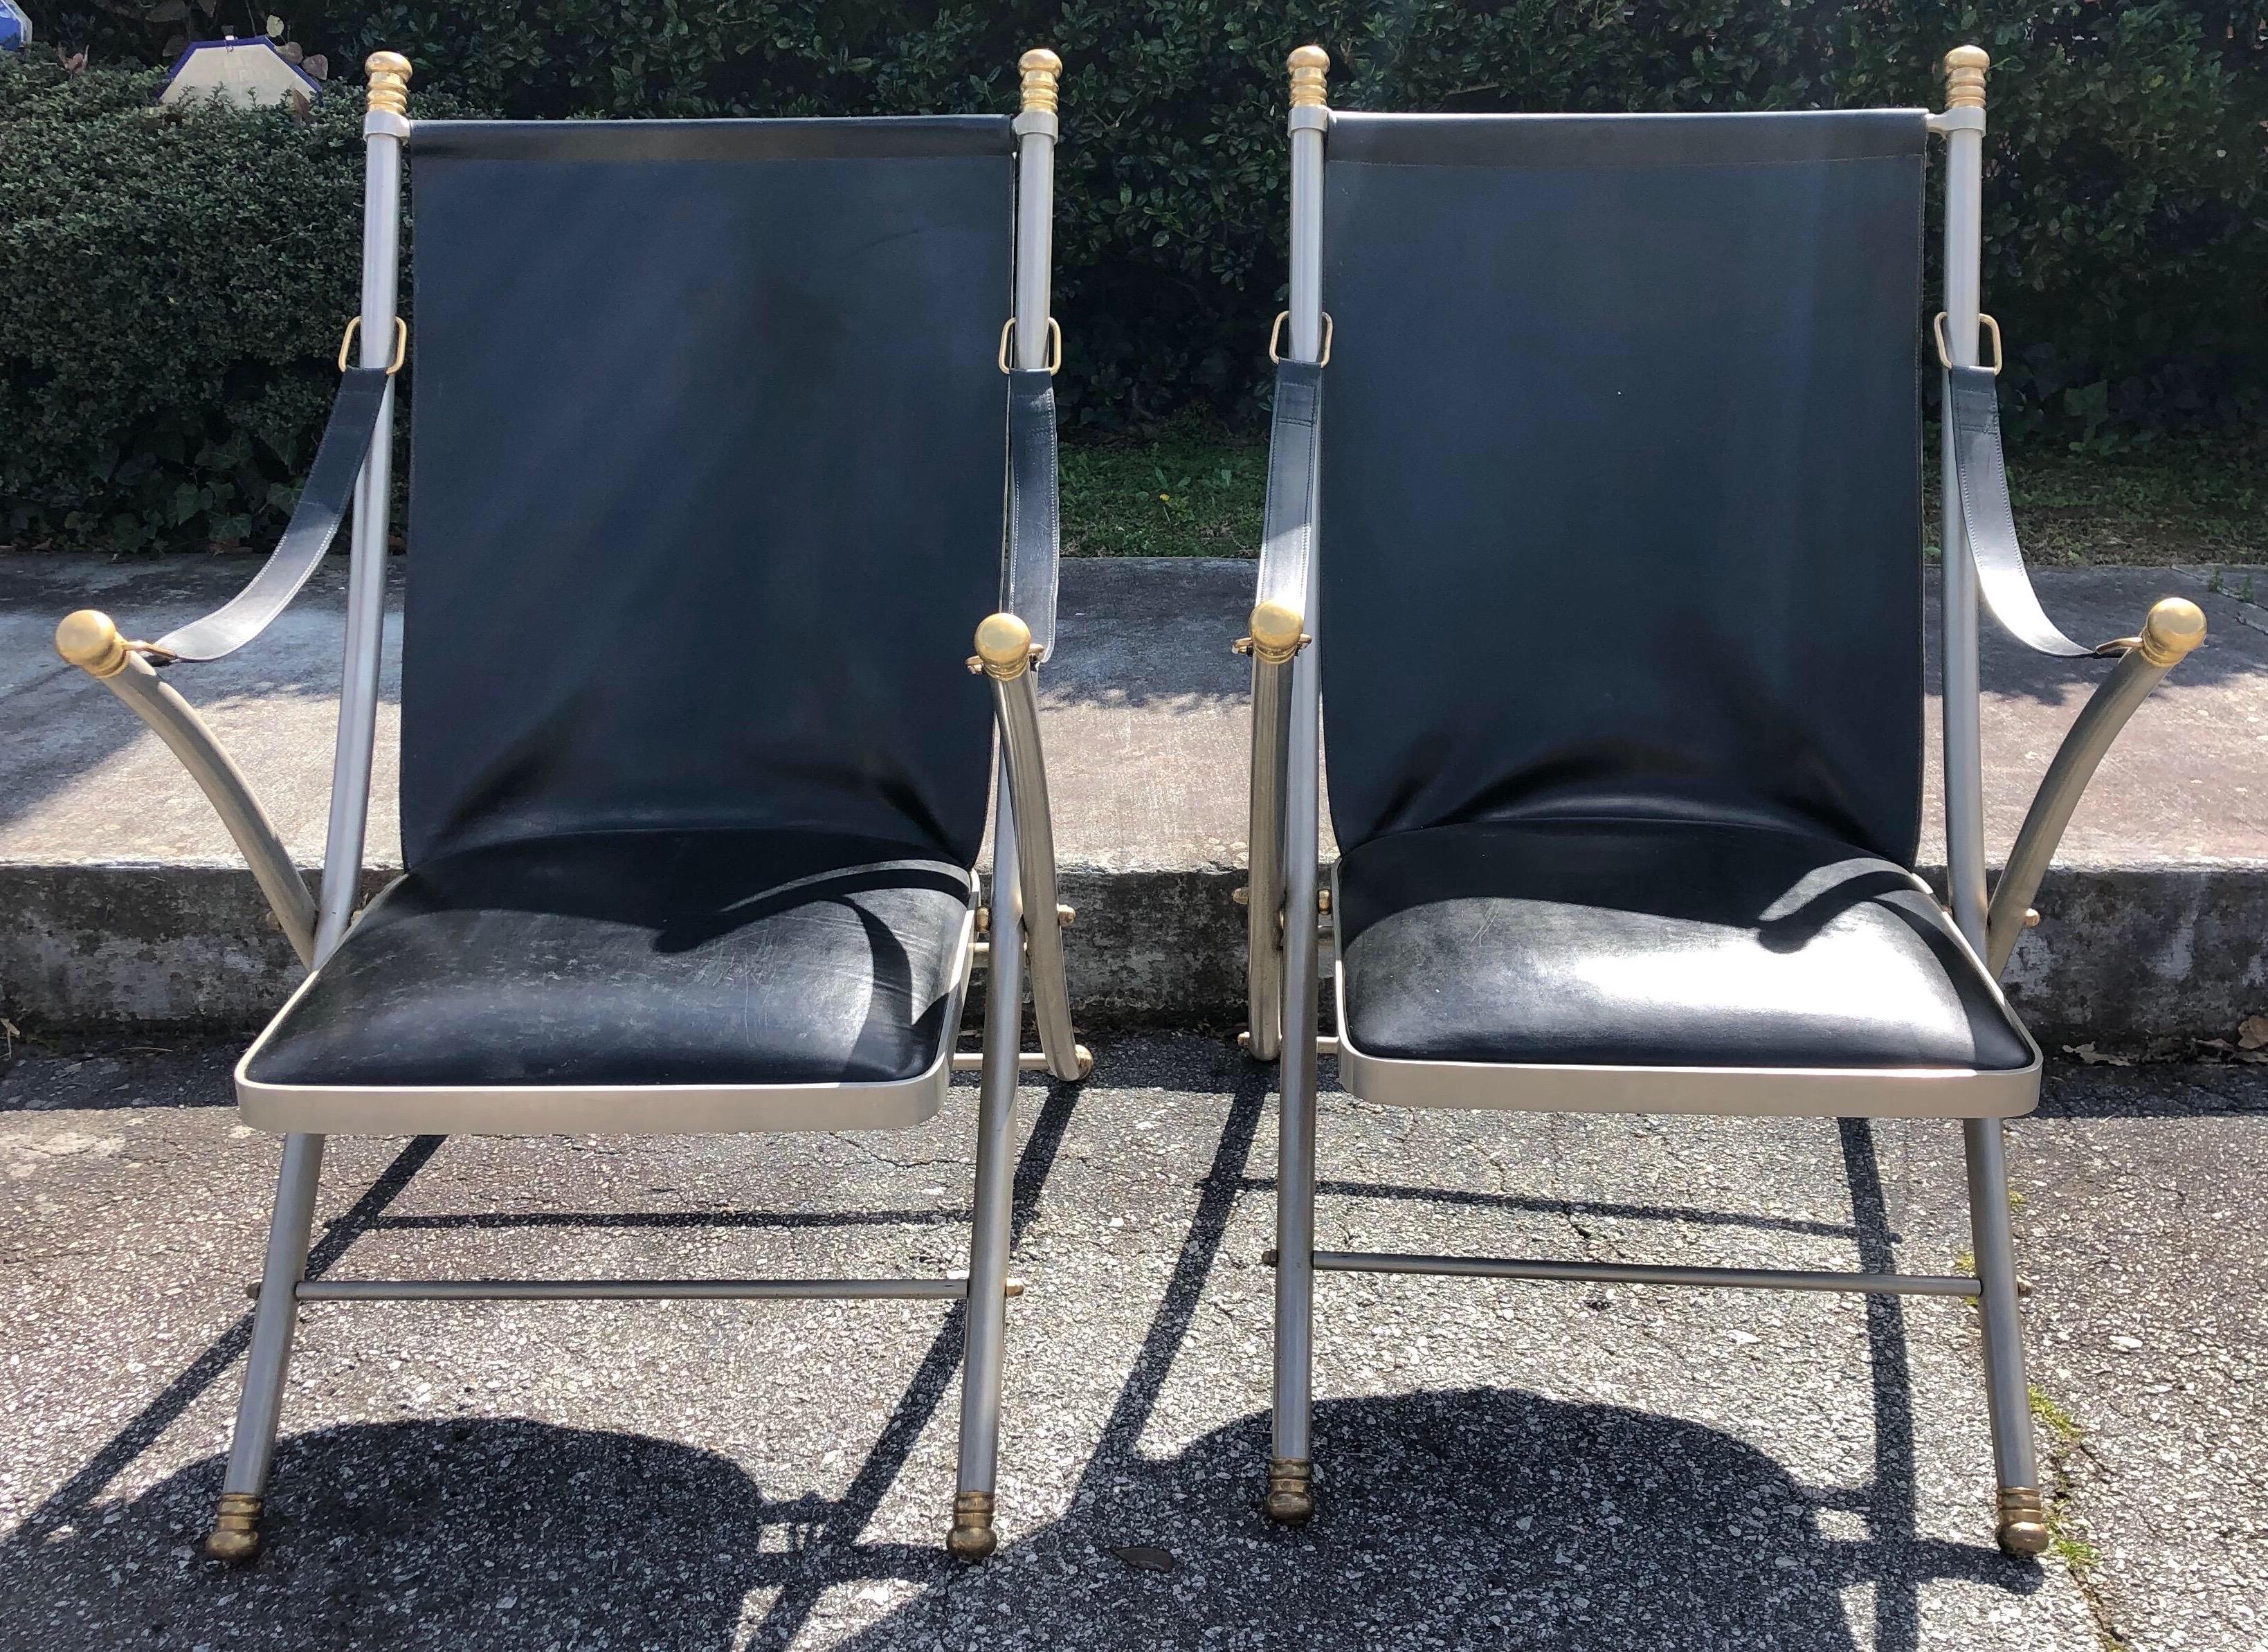 Pair of midcentury Jansen Campaign chairs in steel, leather, and brass. Great black leather seats and straps set in polished steel with brass feet and caps.